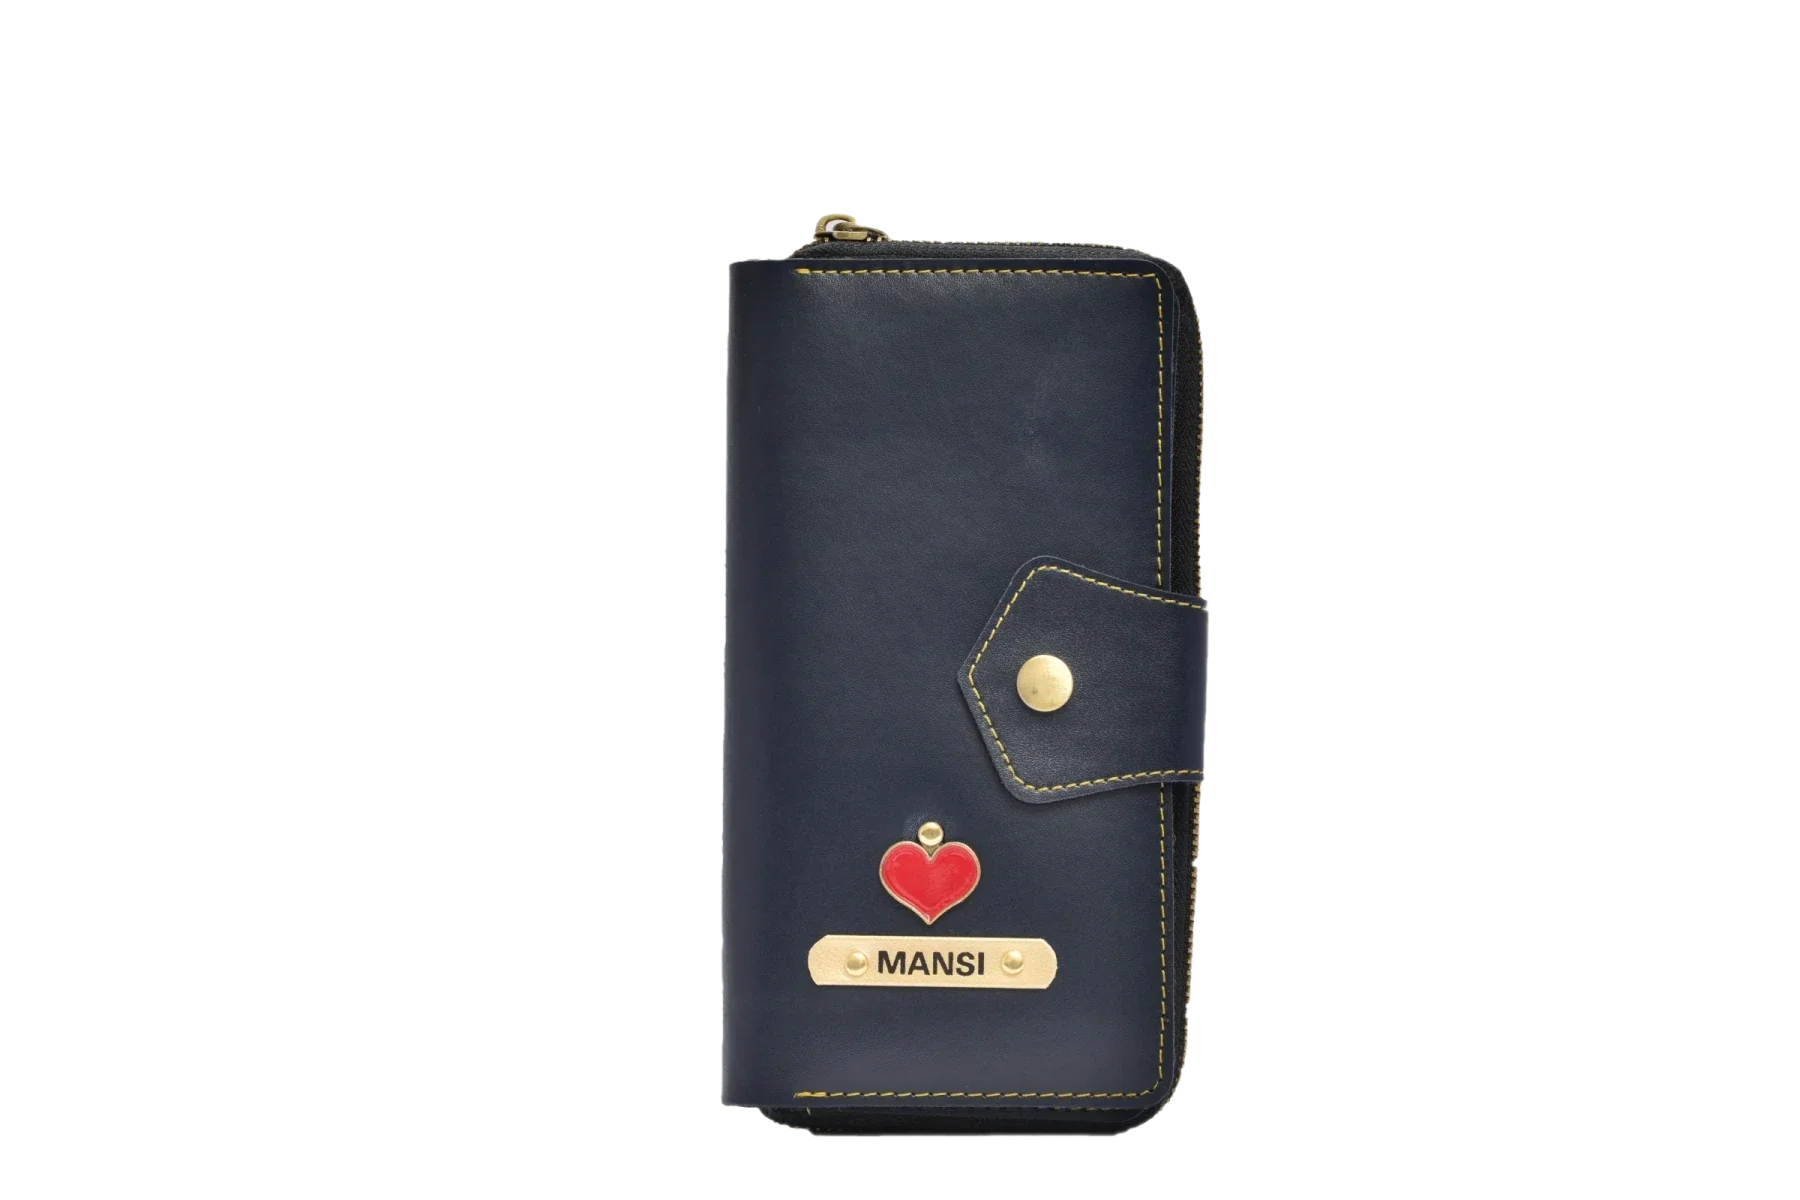 Keep your valuables secure and easily accessible with this sleek and sophisticated zip around lady wallet.